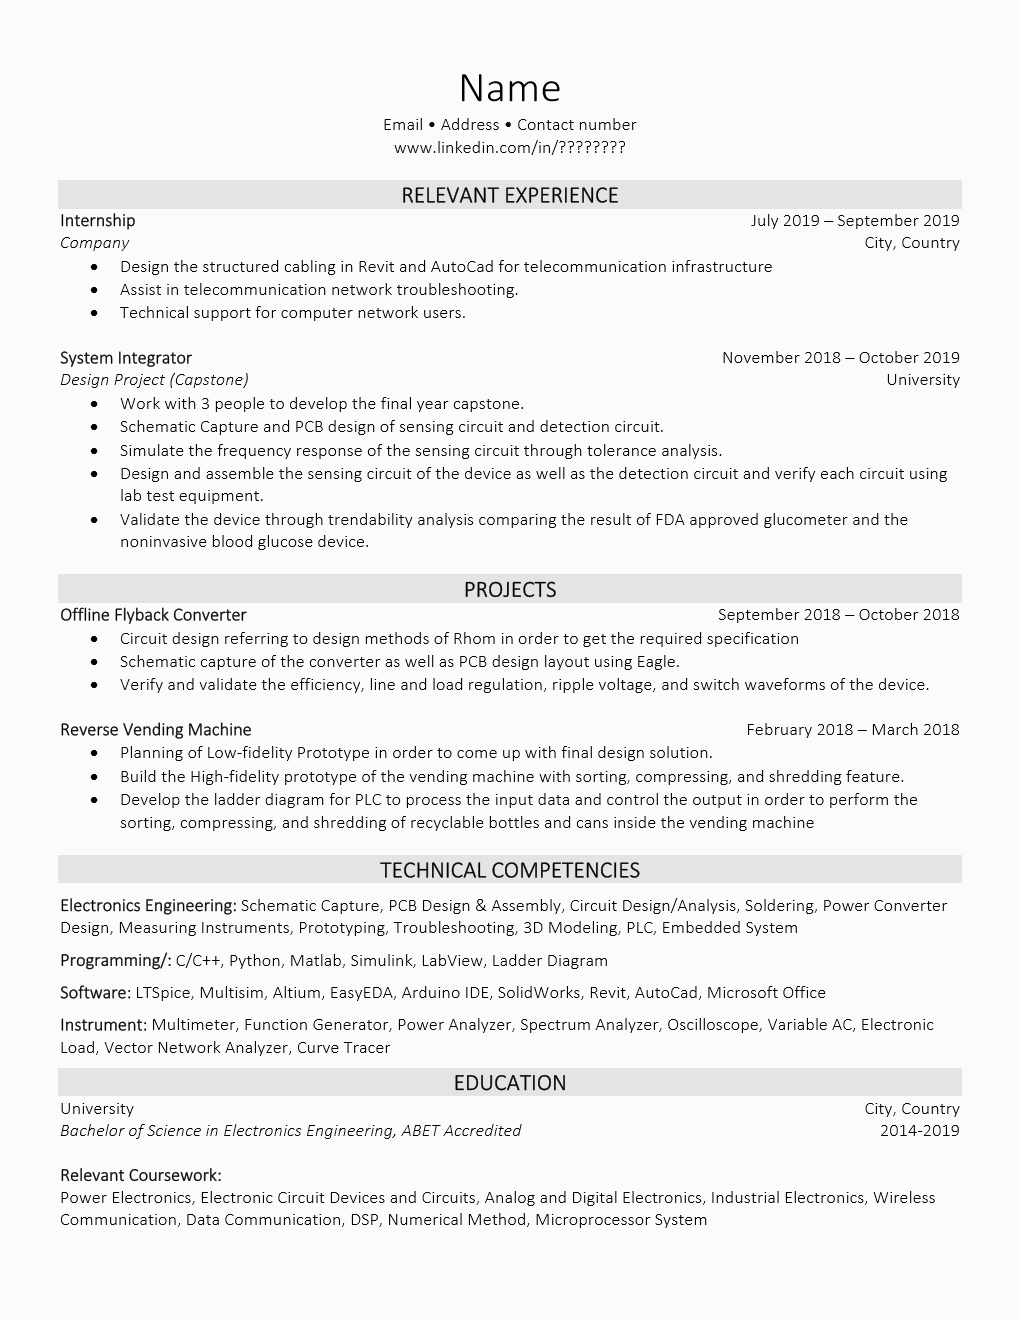 Sample Resume for Ece Fresh Graduate Resume Critique Fresh Graduate From Other Country New